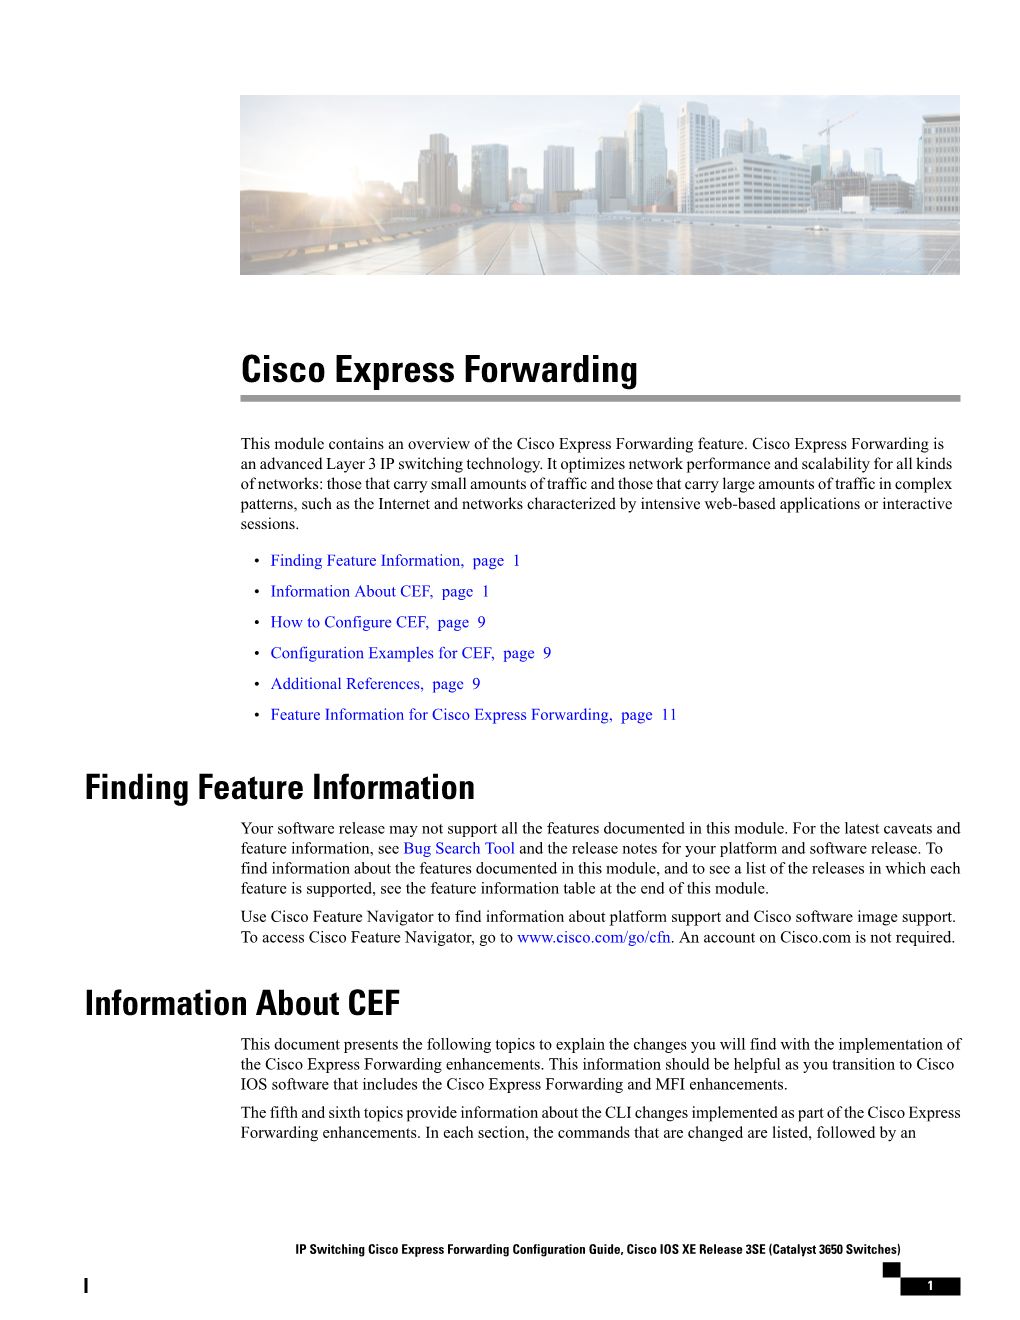 IP Switching Cisco Express Forwarding Configuration Guide, Cisco IOS XE Release 3SE (Catalyst 3650 Switches)